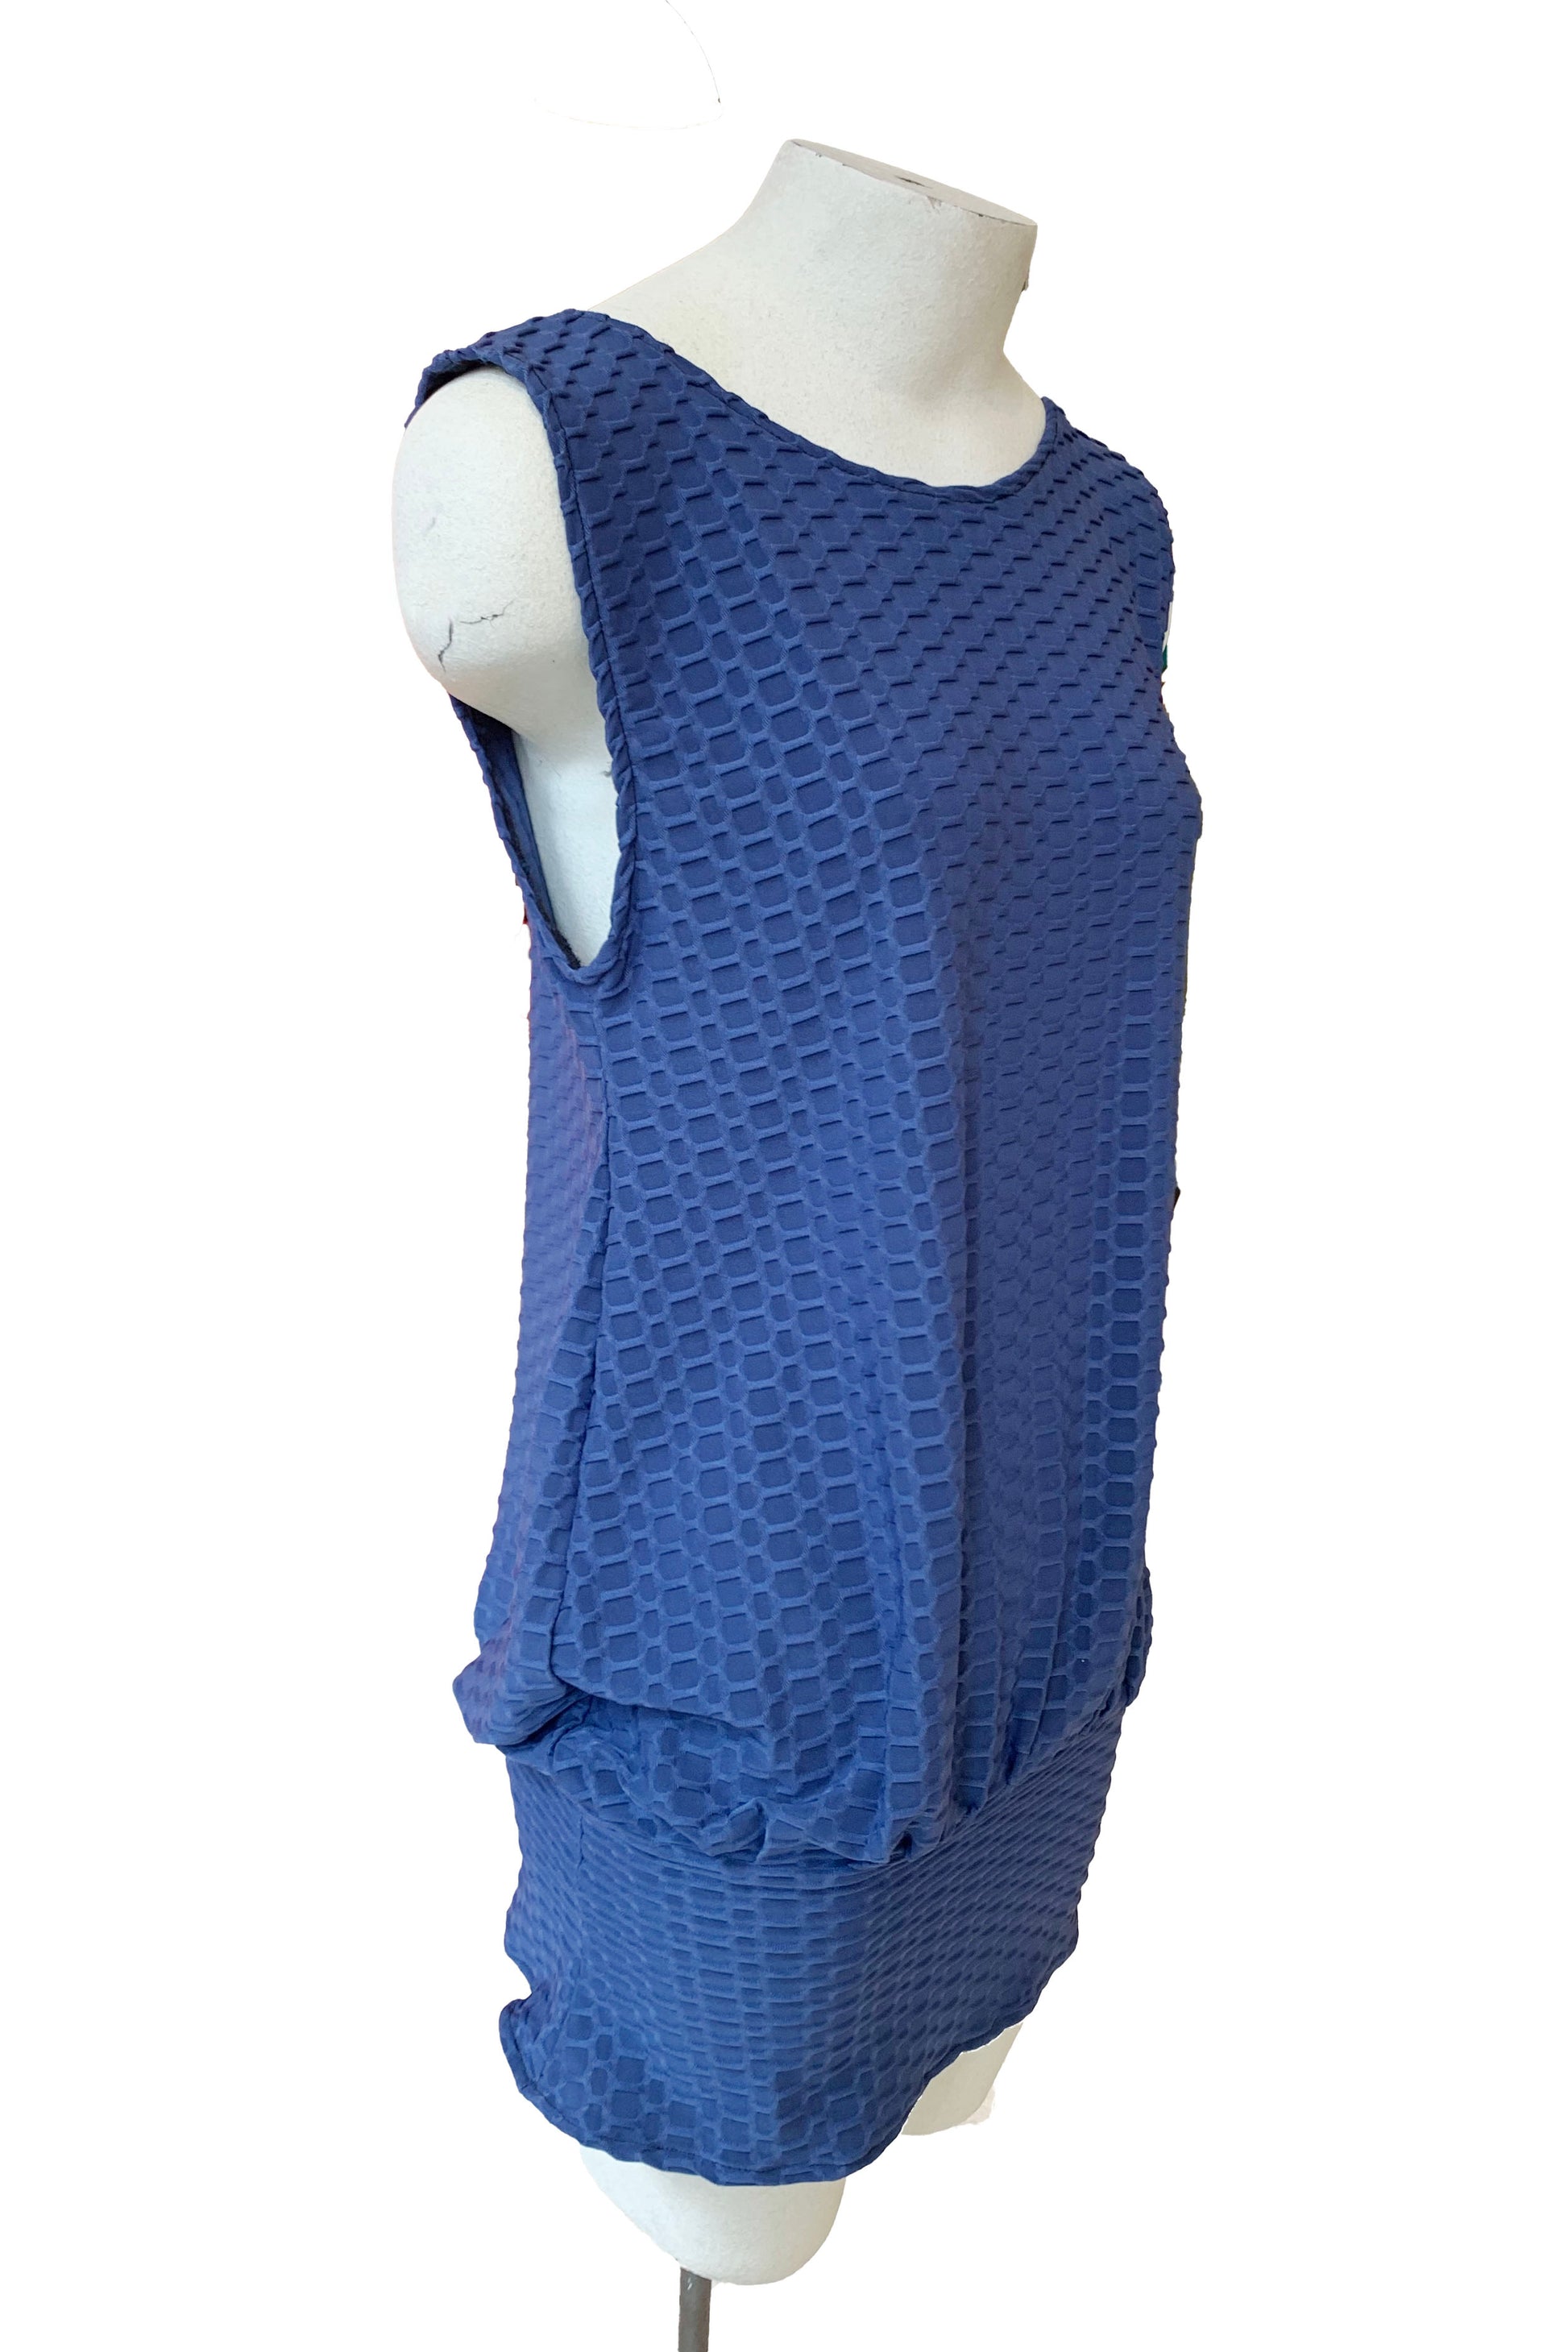 Sleeveless Kafta Top by SI Design, Blue Texture, round neck, blouson top, wide waistband, sizes XS to L, made in Montreal 